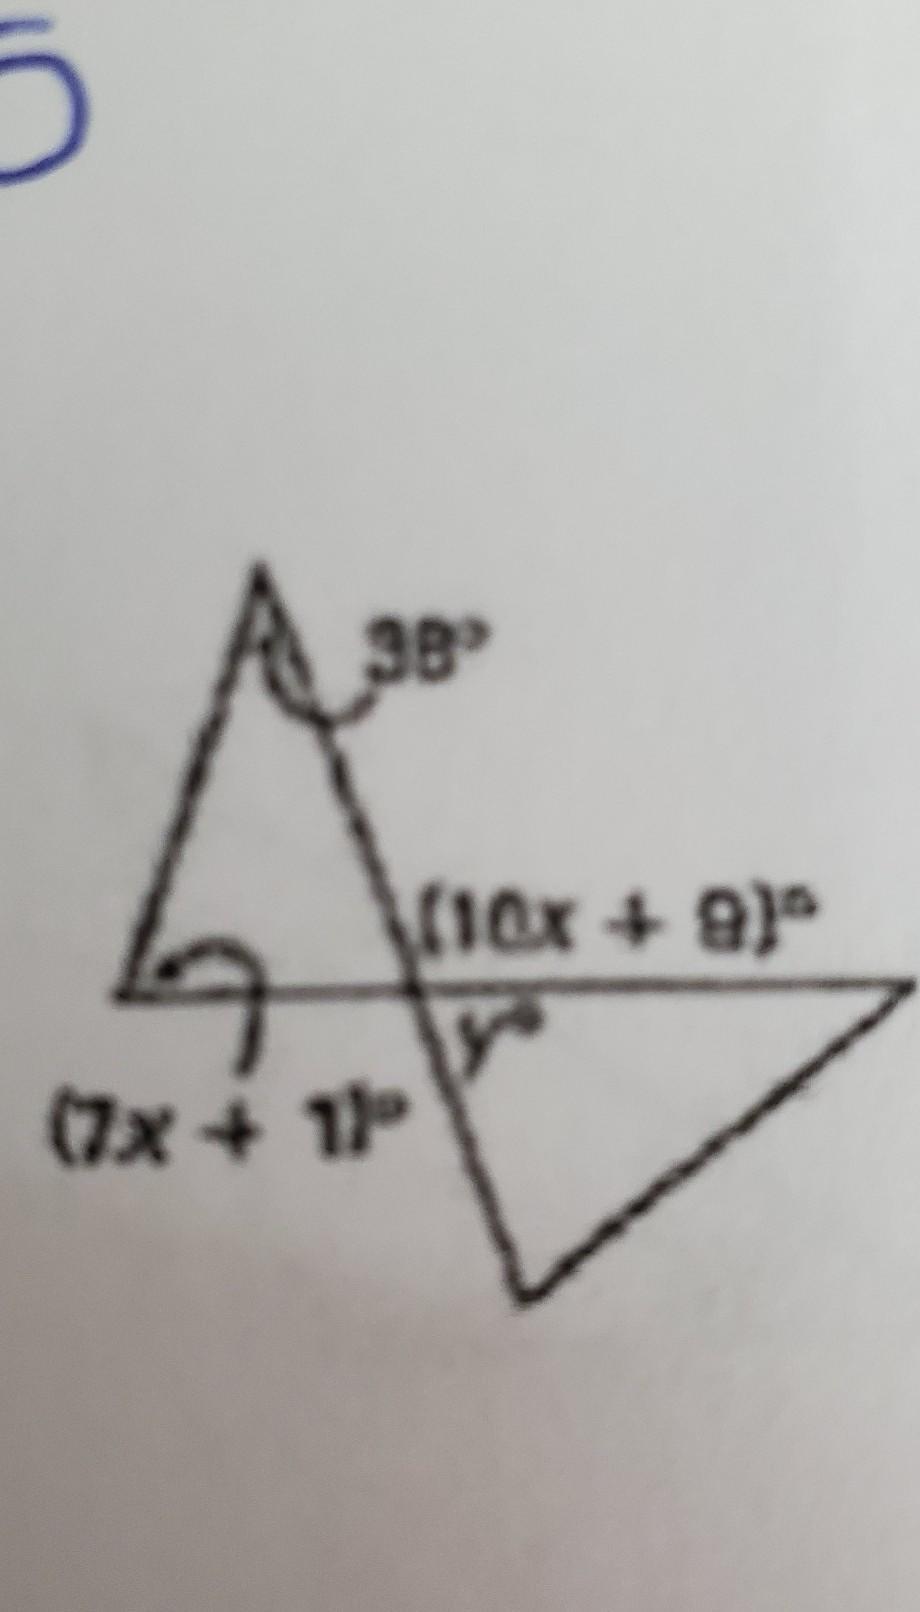 I Need Help With This. Find The Value ( S ) Of X And Y.